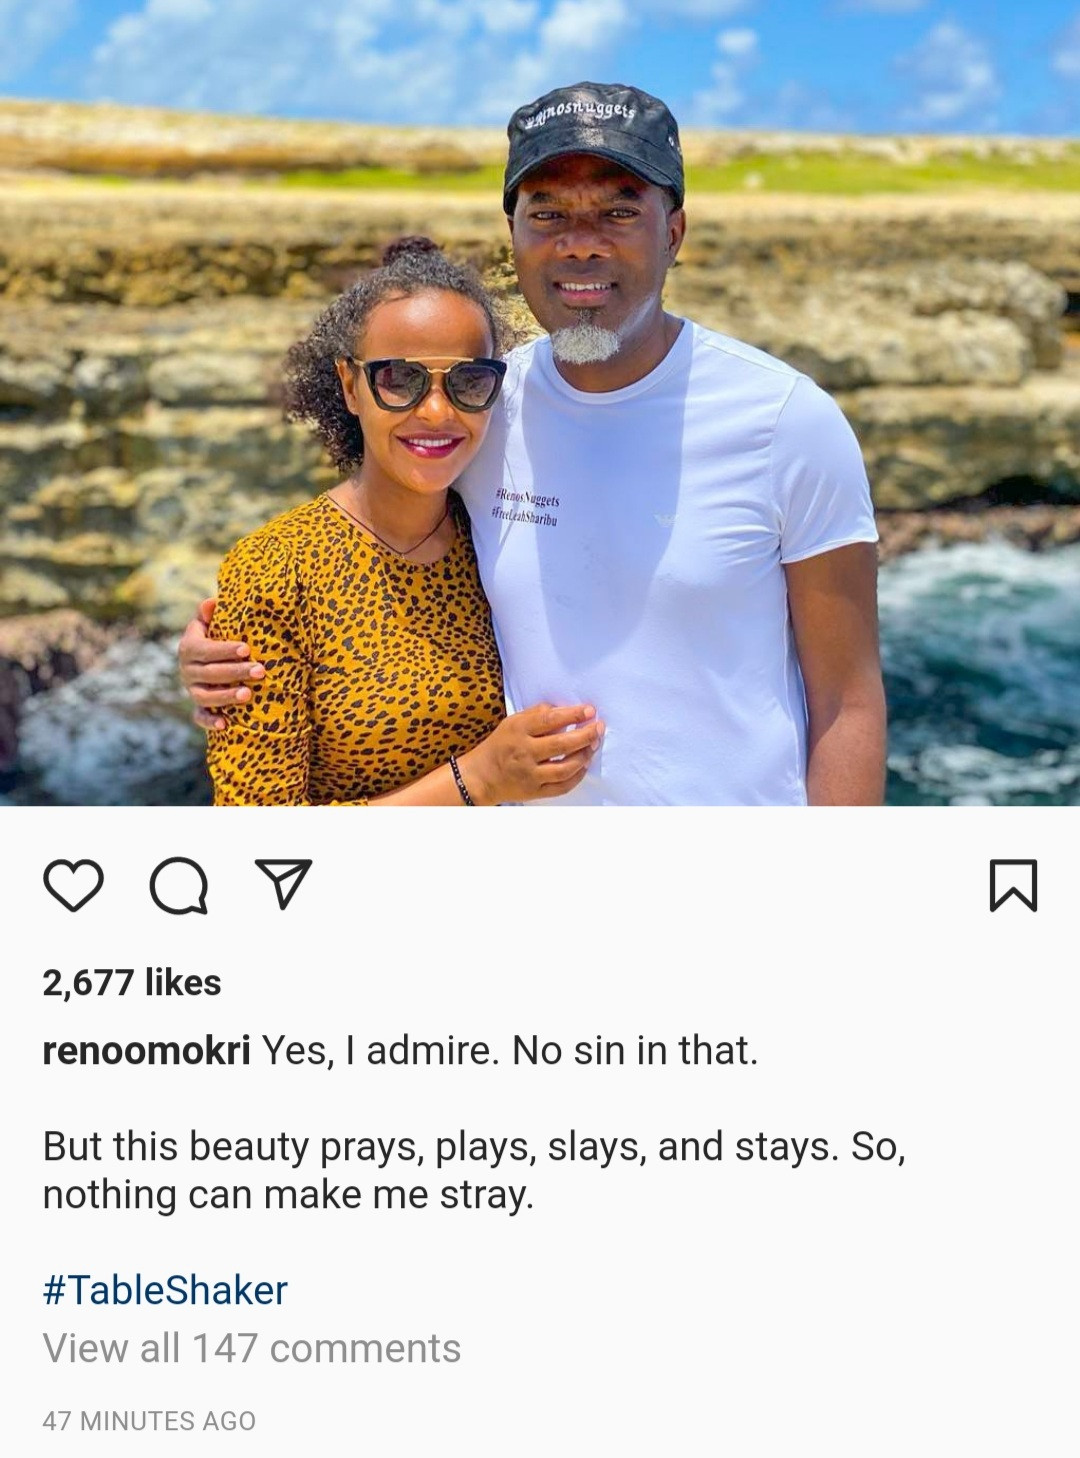 Reno Omokri admits that he finds Bianca Ojukwu attractive but says nothing can make him Cheat on his wife